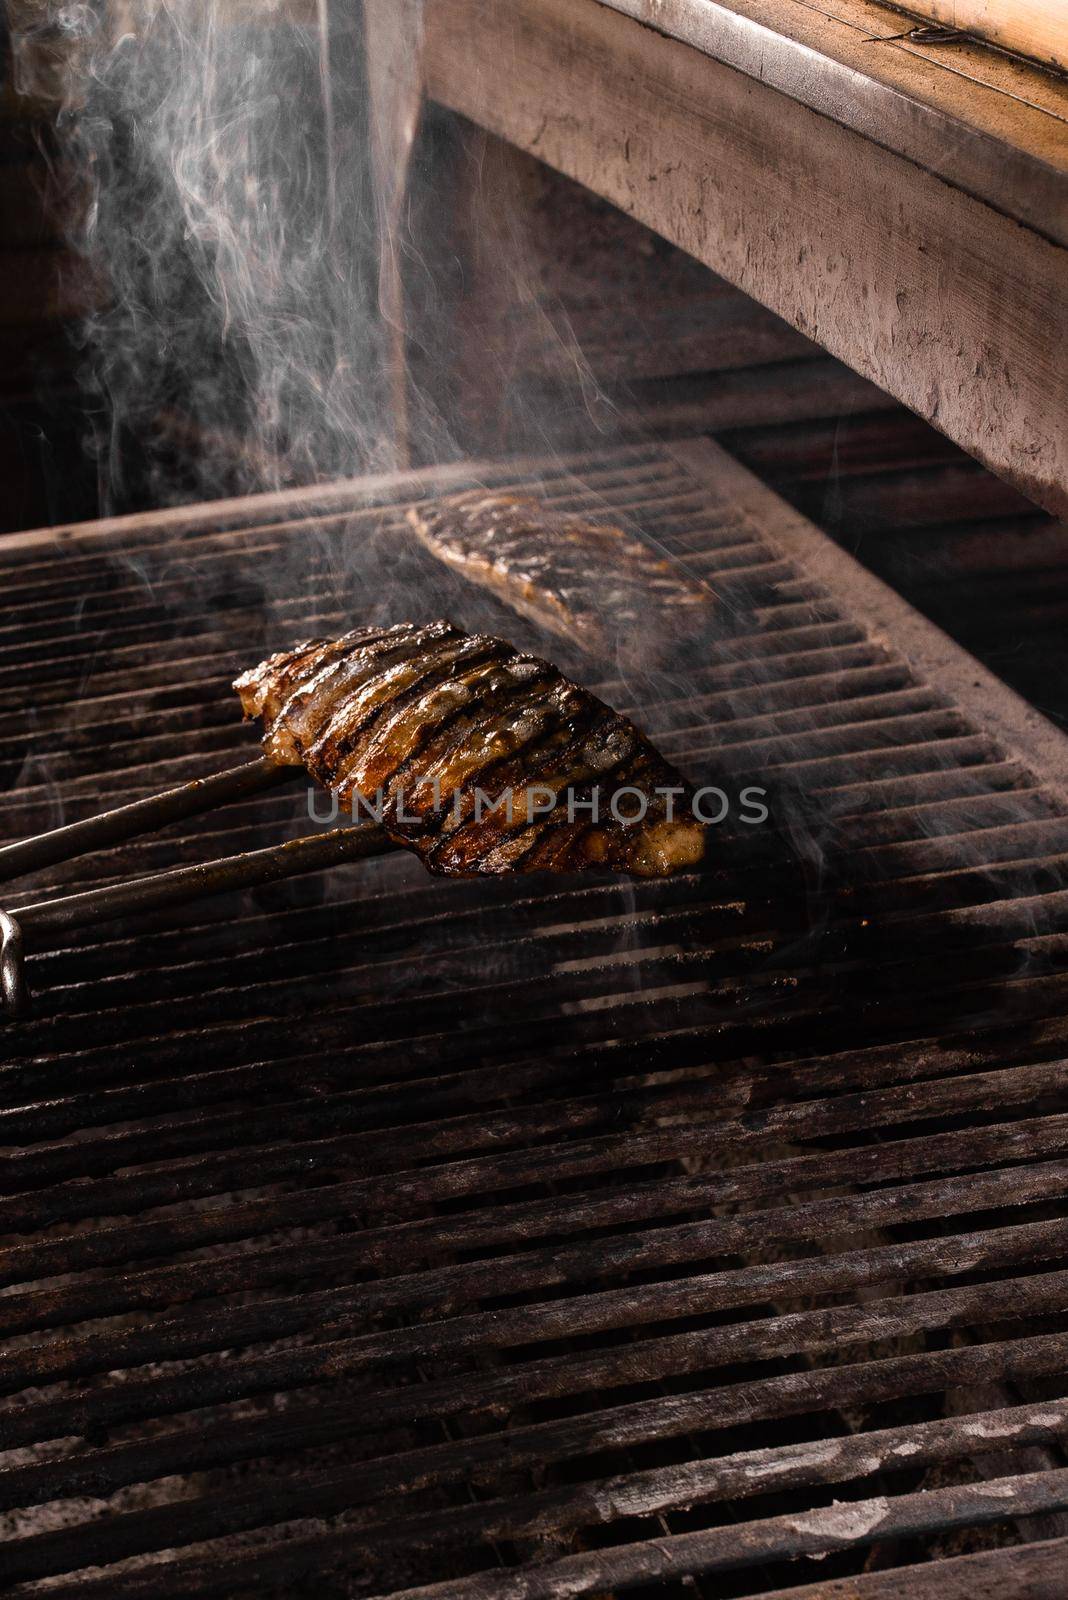 Grilling chicken fillets with metal tongs. The cook prepares a barbecue dish by Rabizo